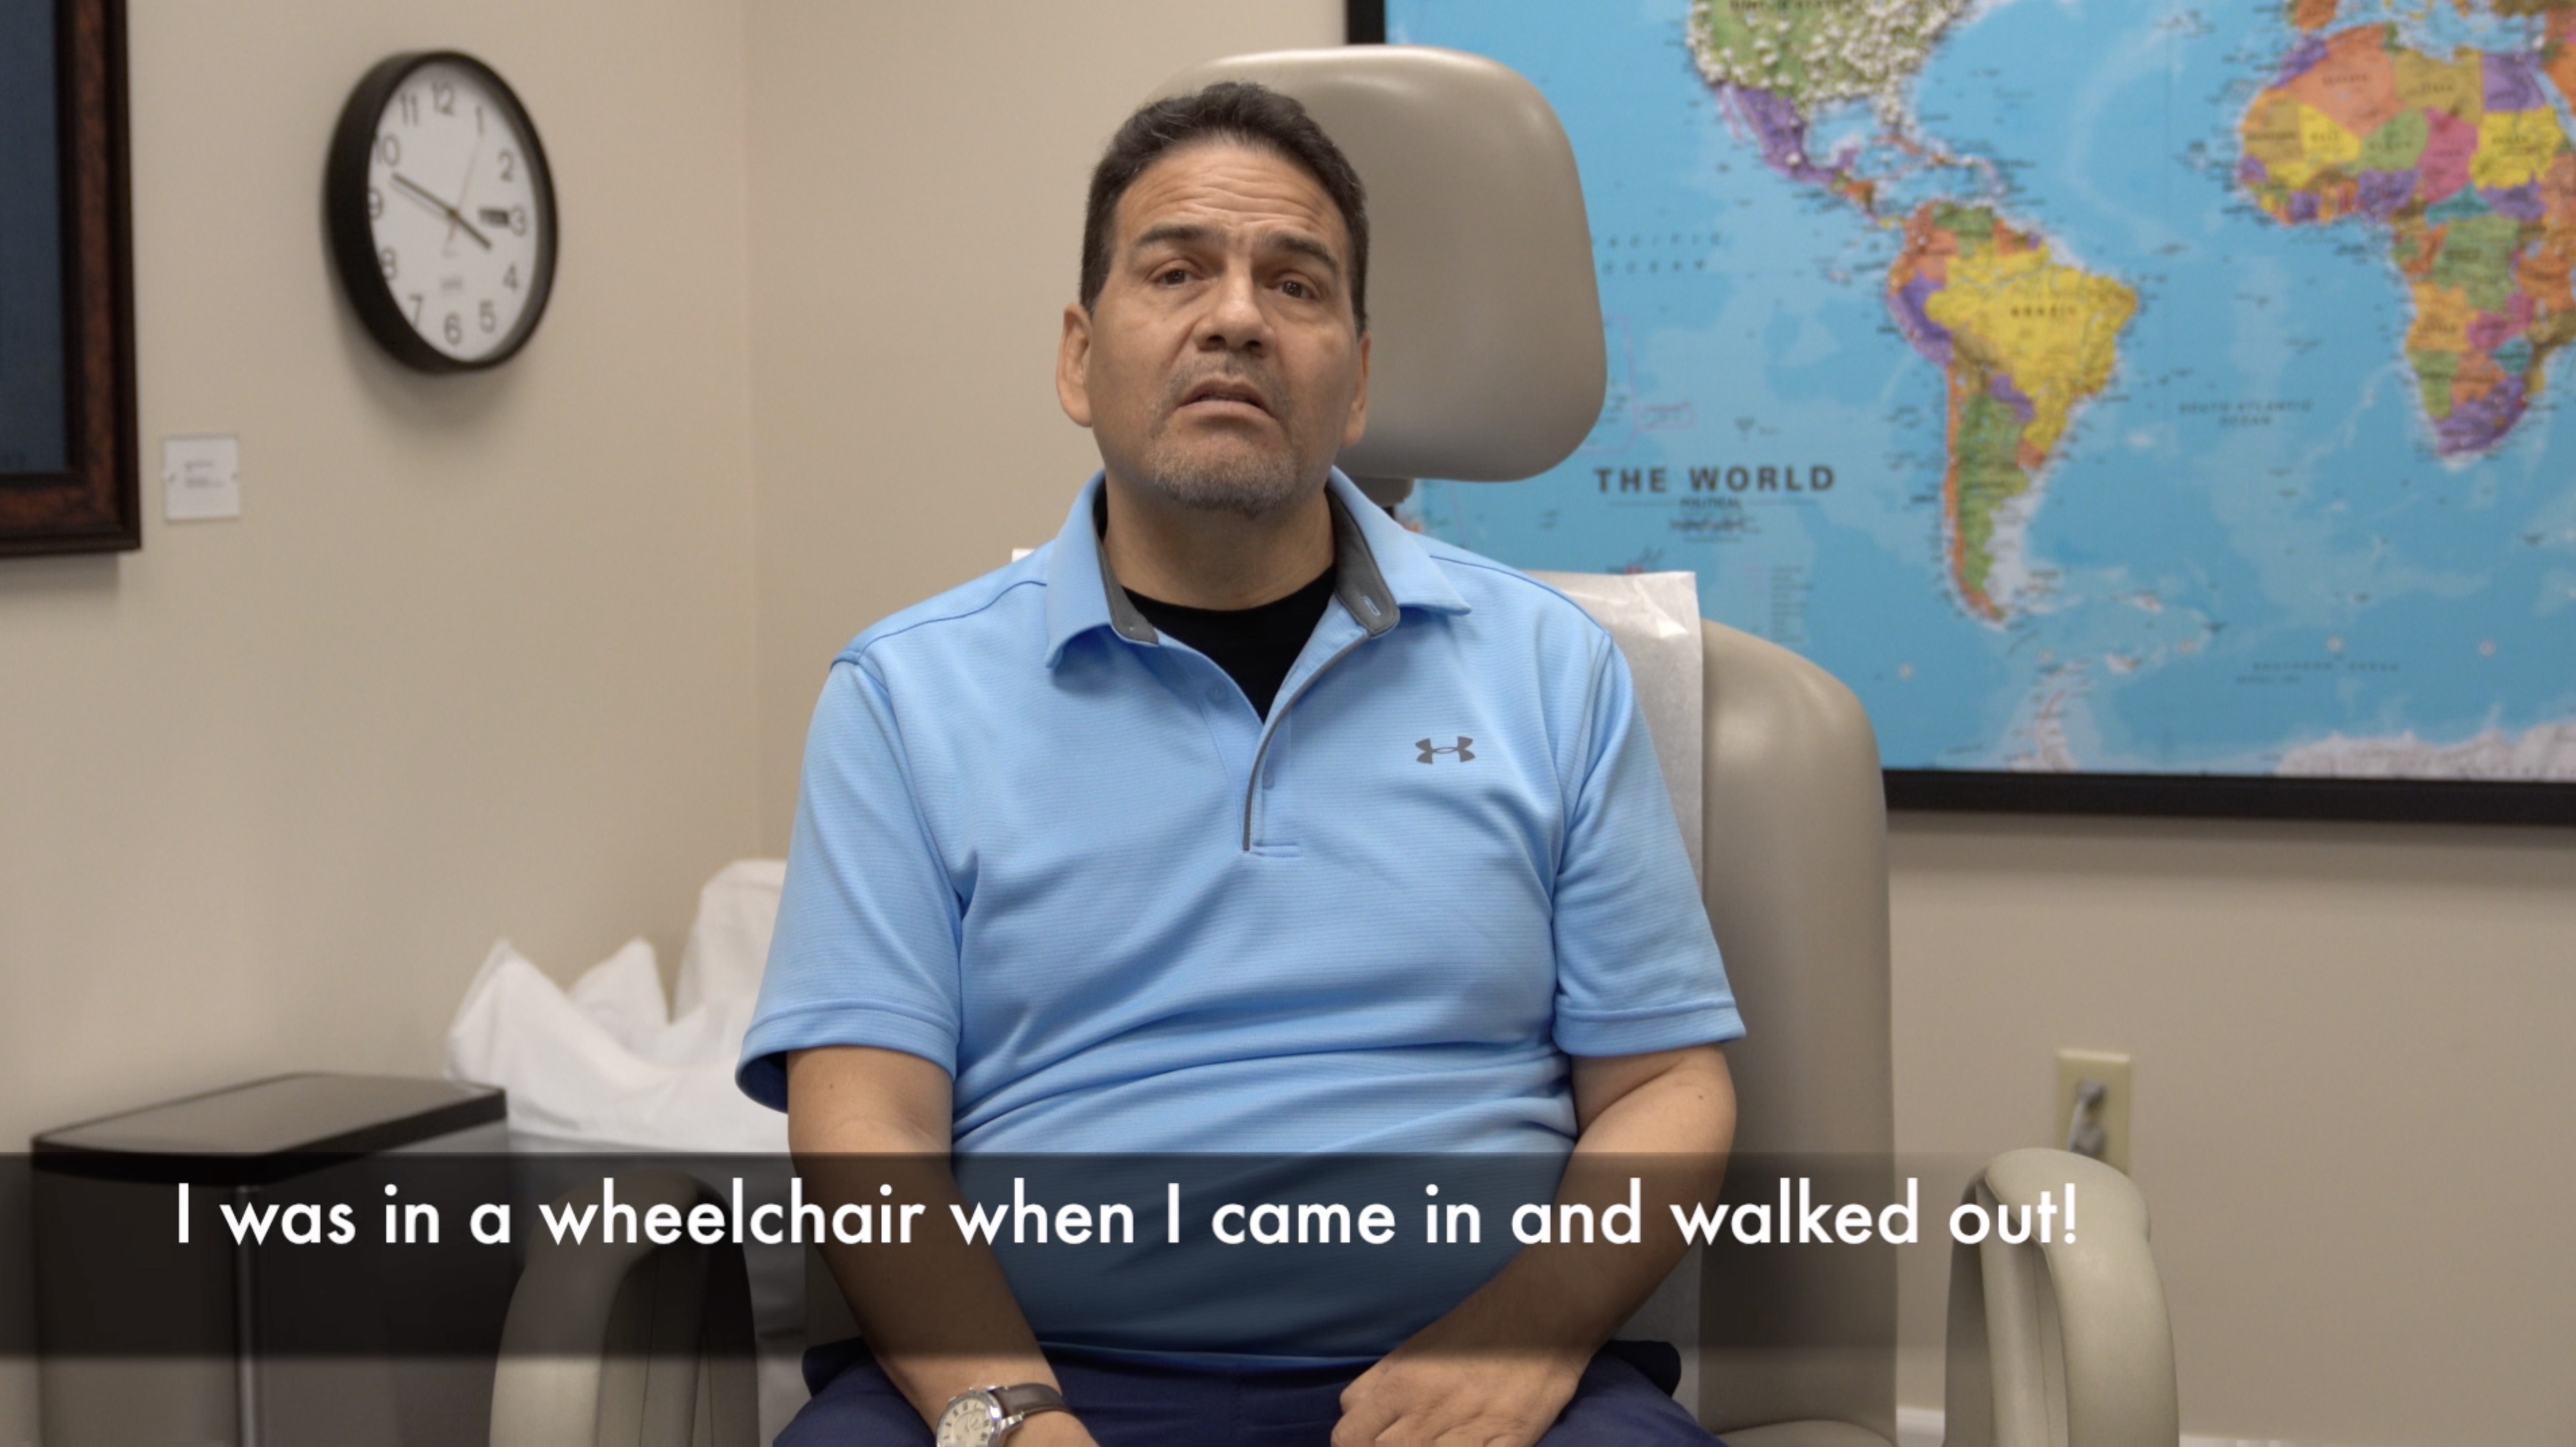 From wheelchair to walking unassisted after treatment by Edward Tobinick, M.D., 2 yrs after stroke